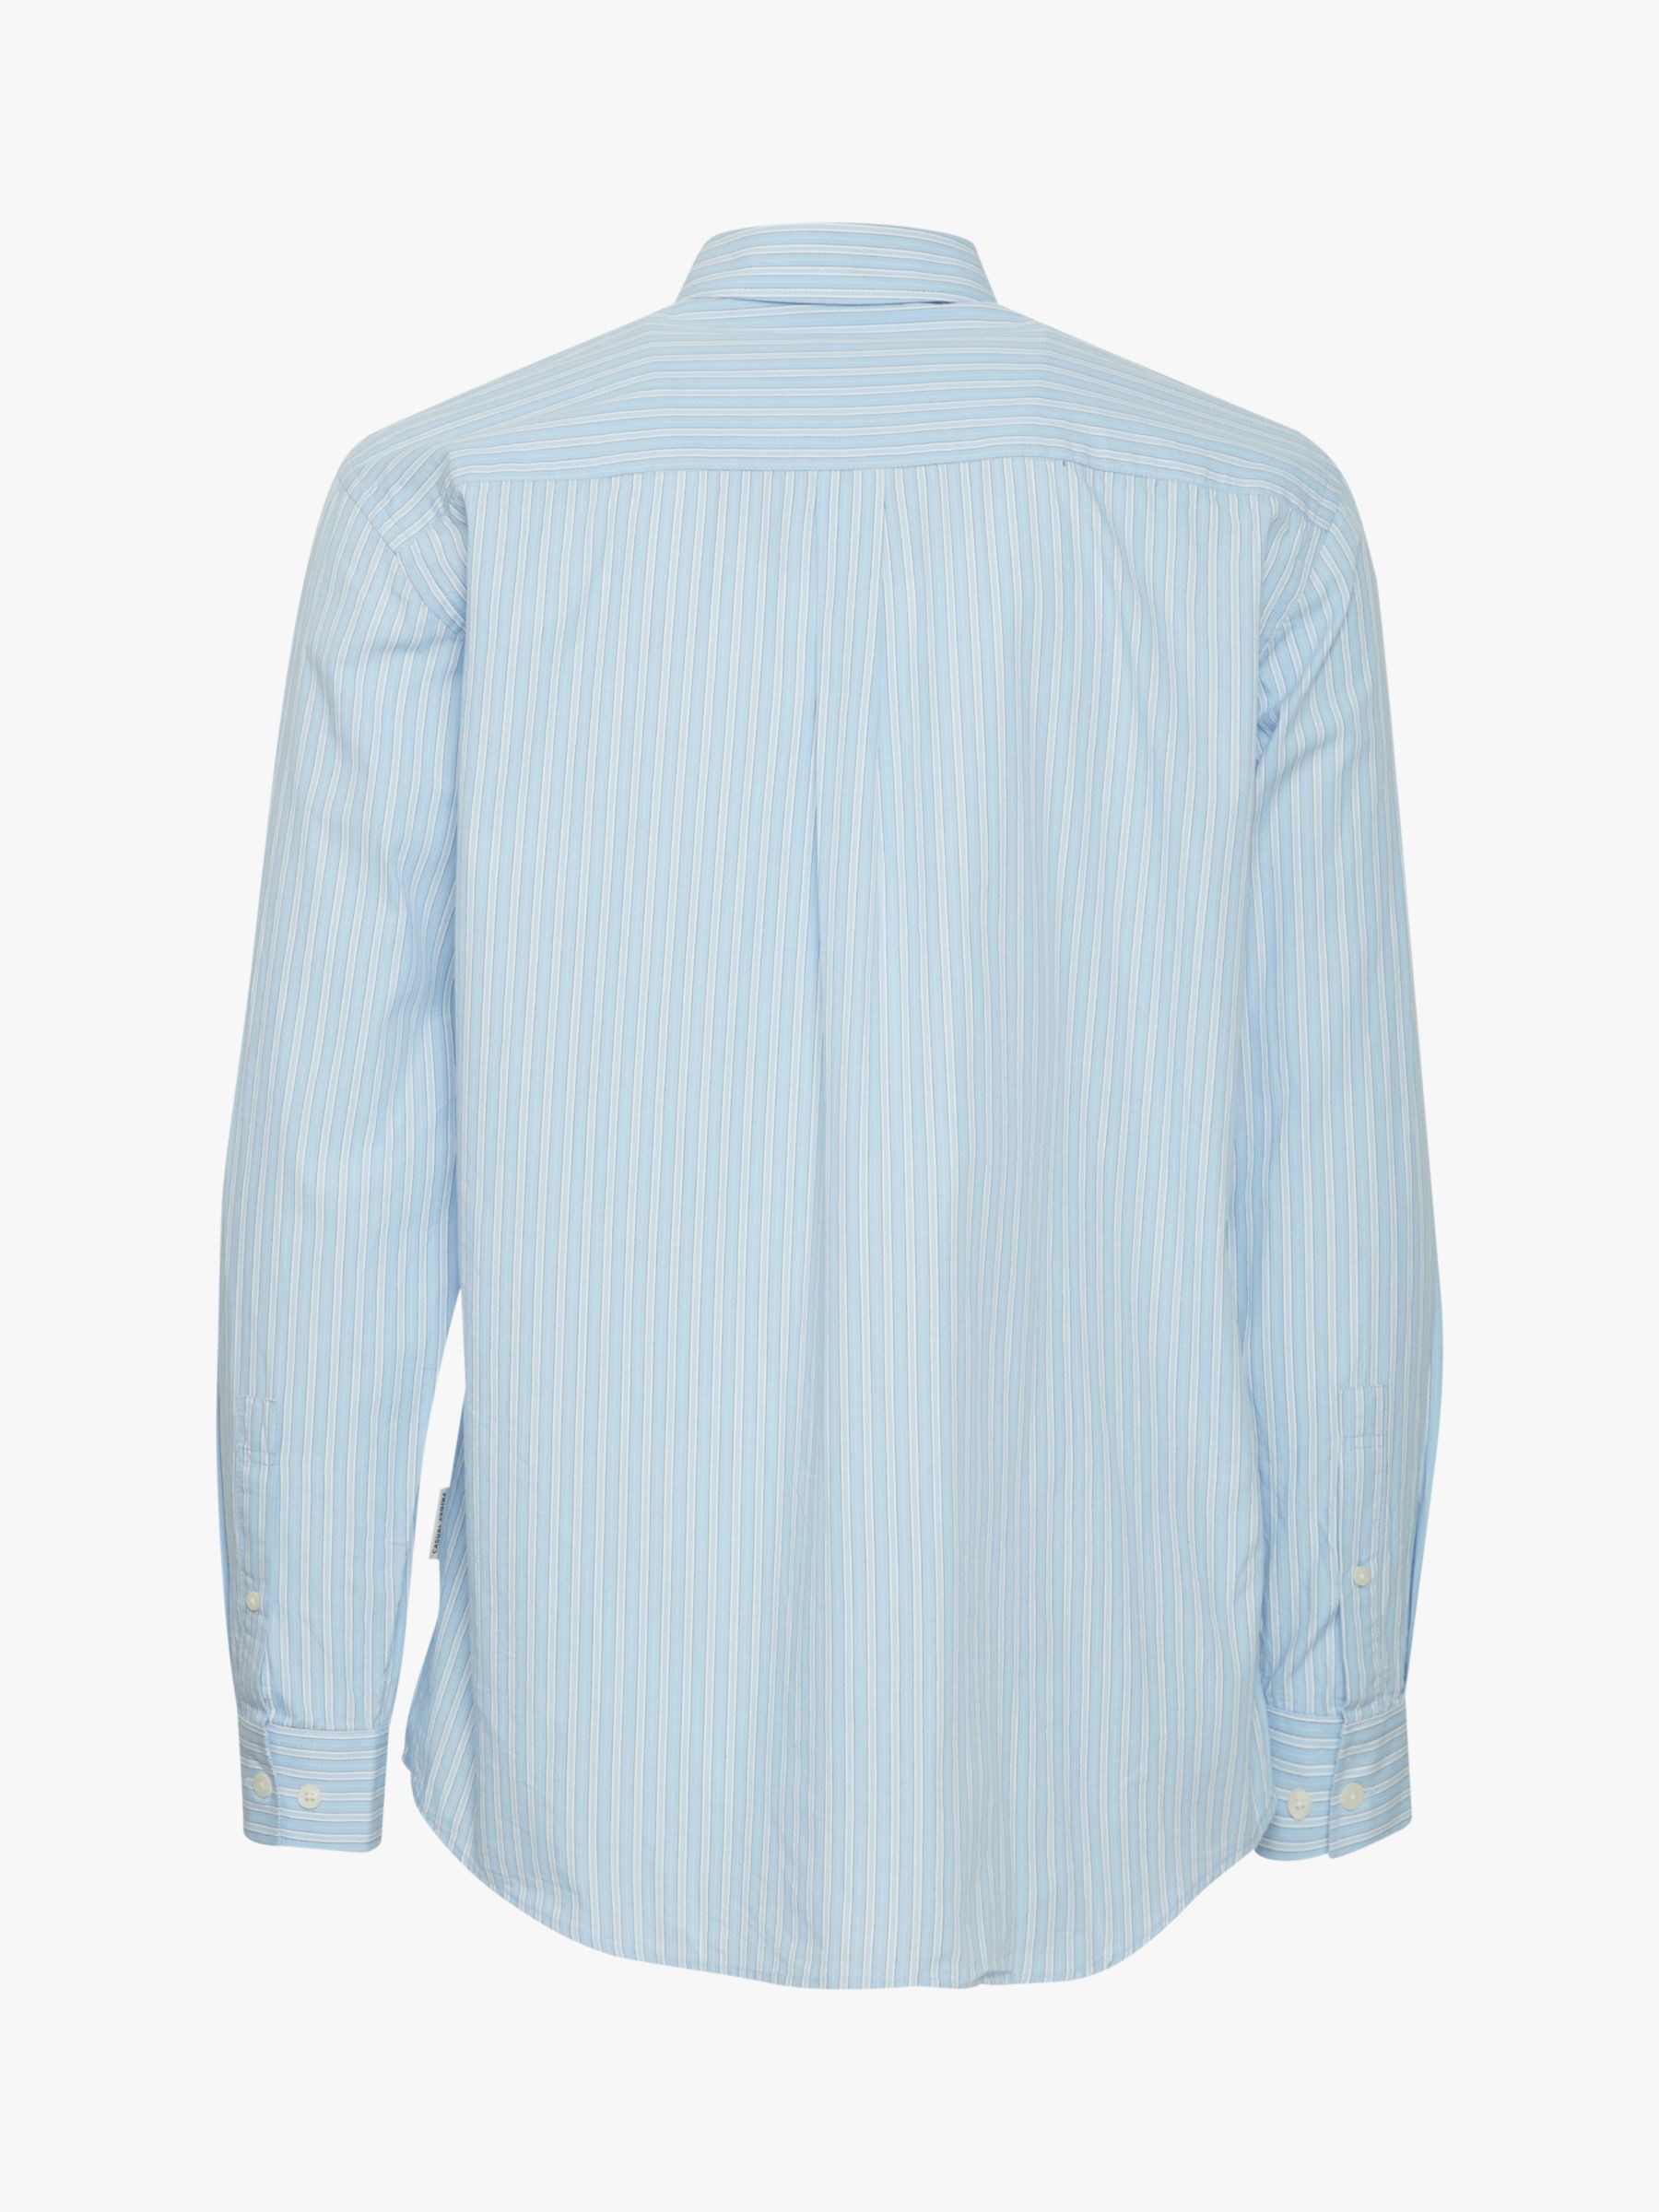 Casual Friday Alvin Long Sleeve Striped Shirt, Chambray Blue, S